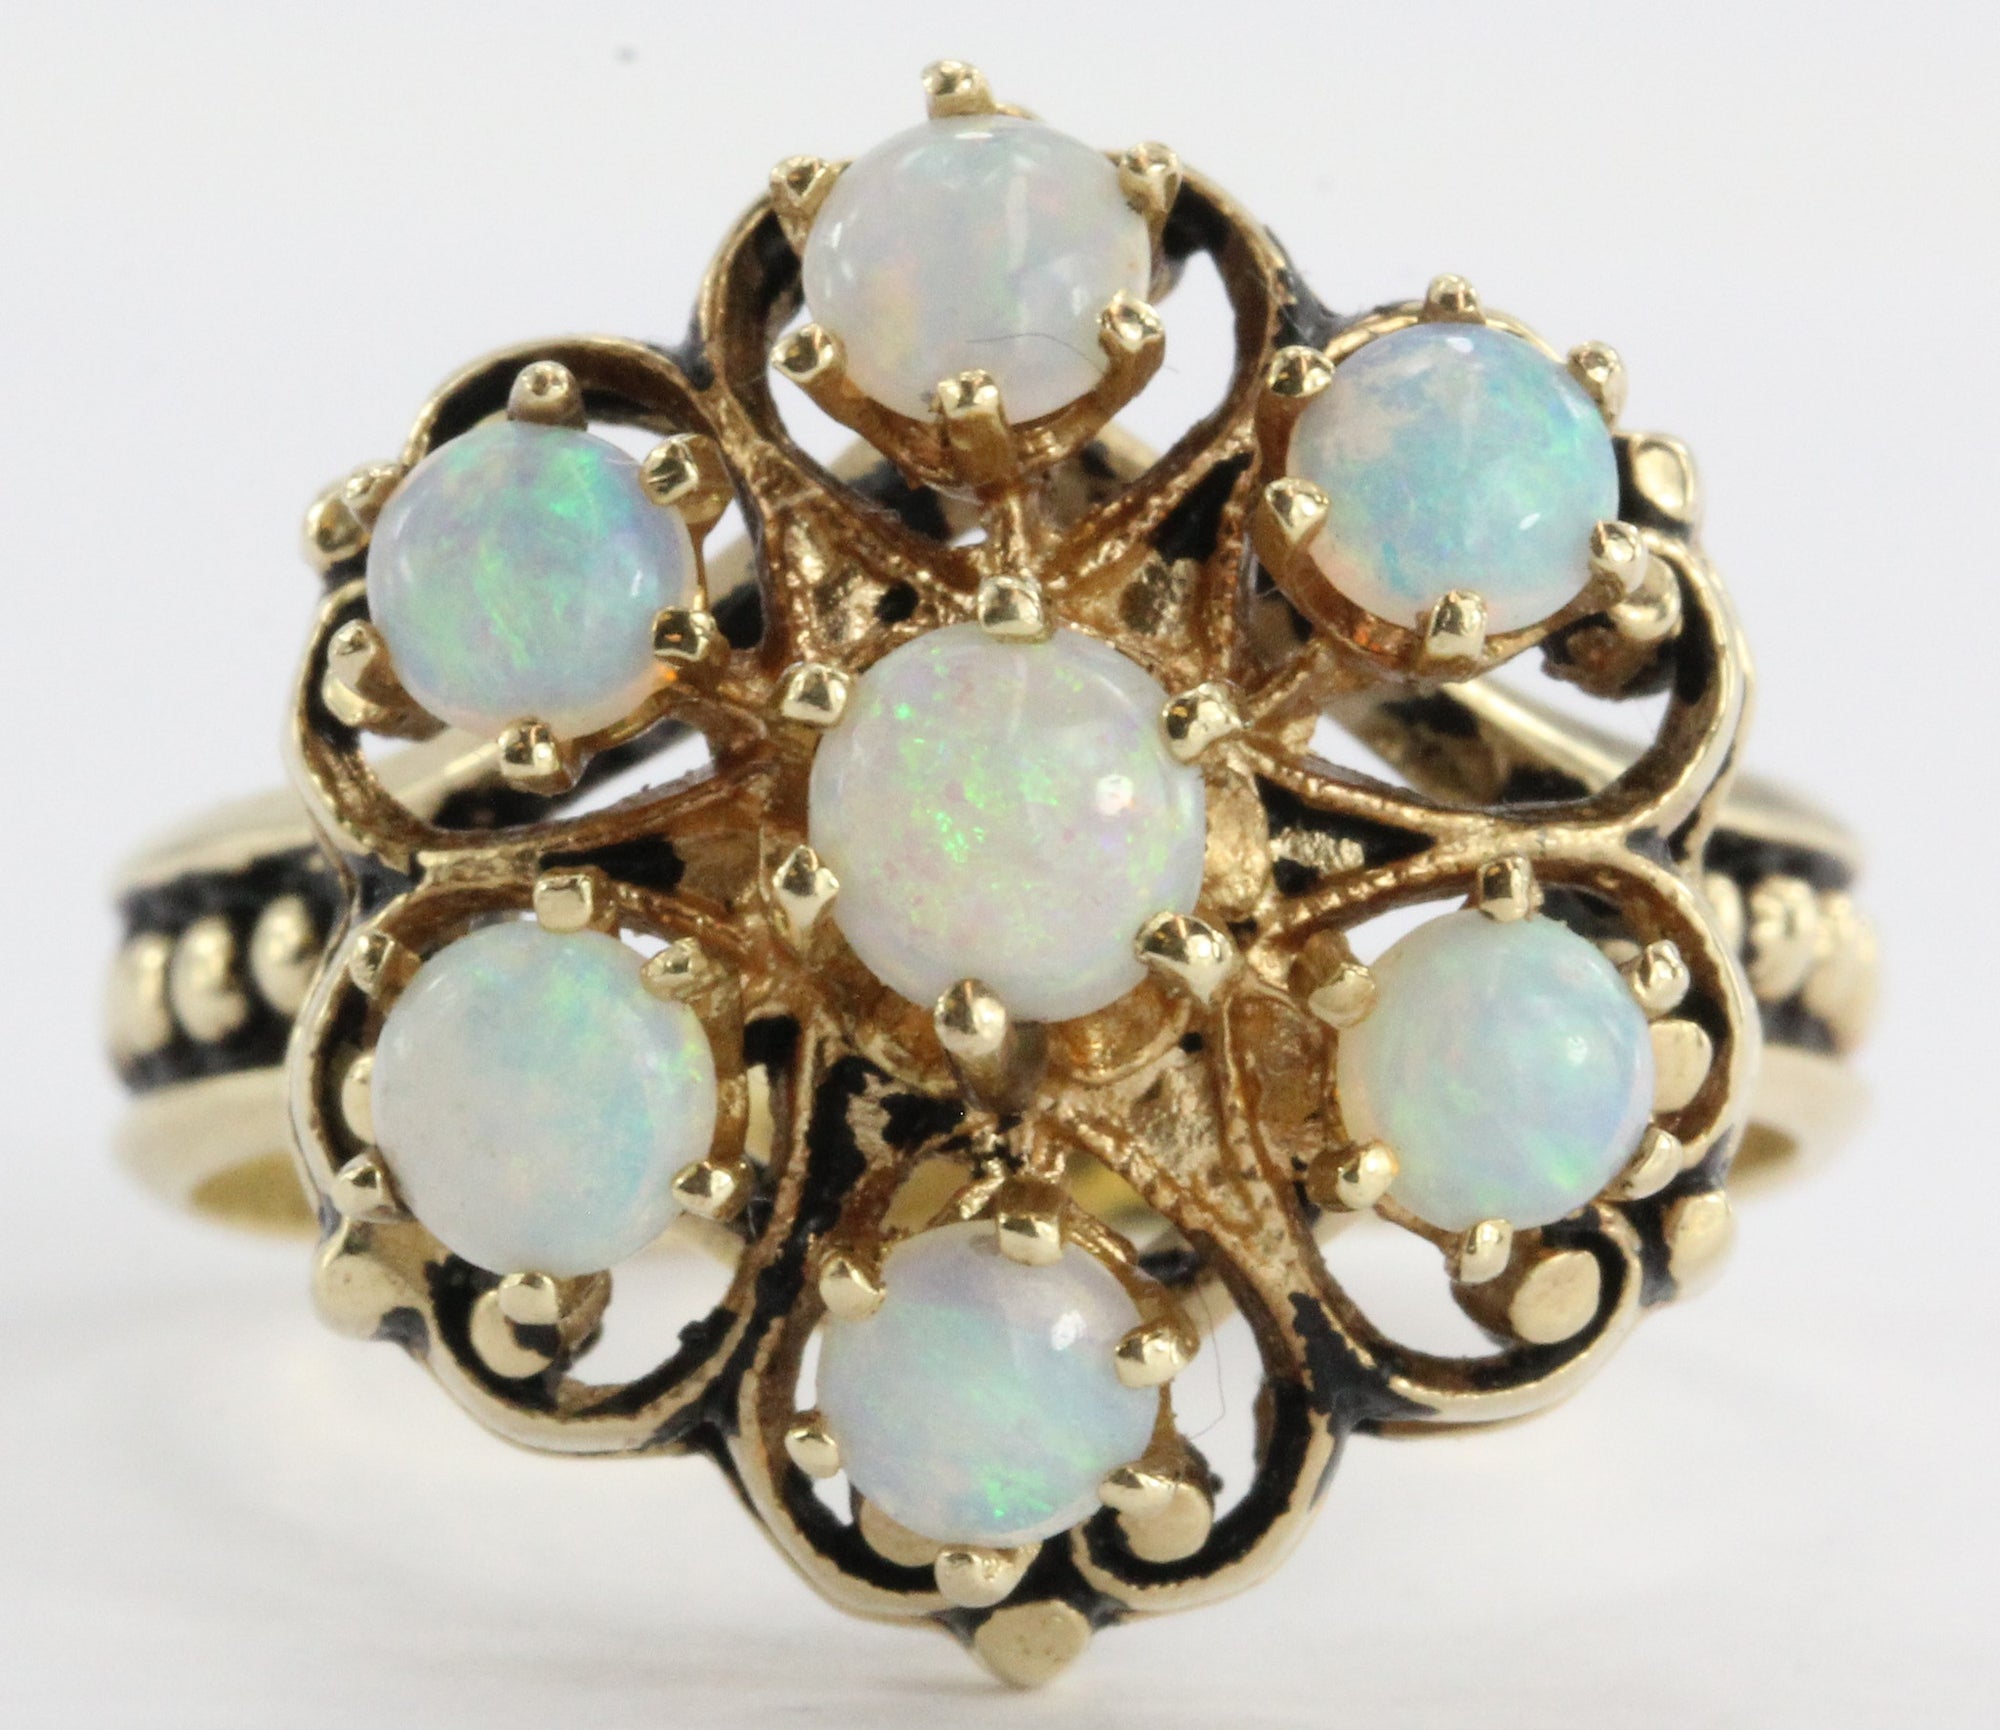 Antique Victorian 14k Gold Fiery Opal Ring Signed – QUEEN MAY